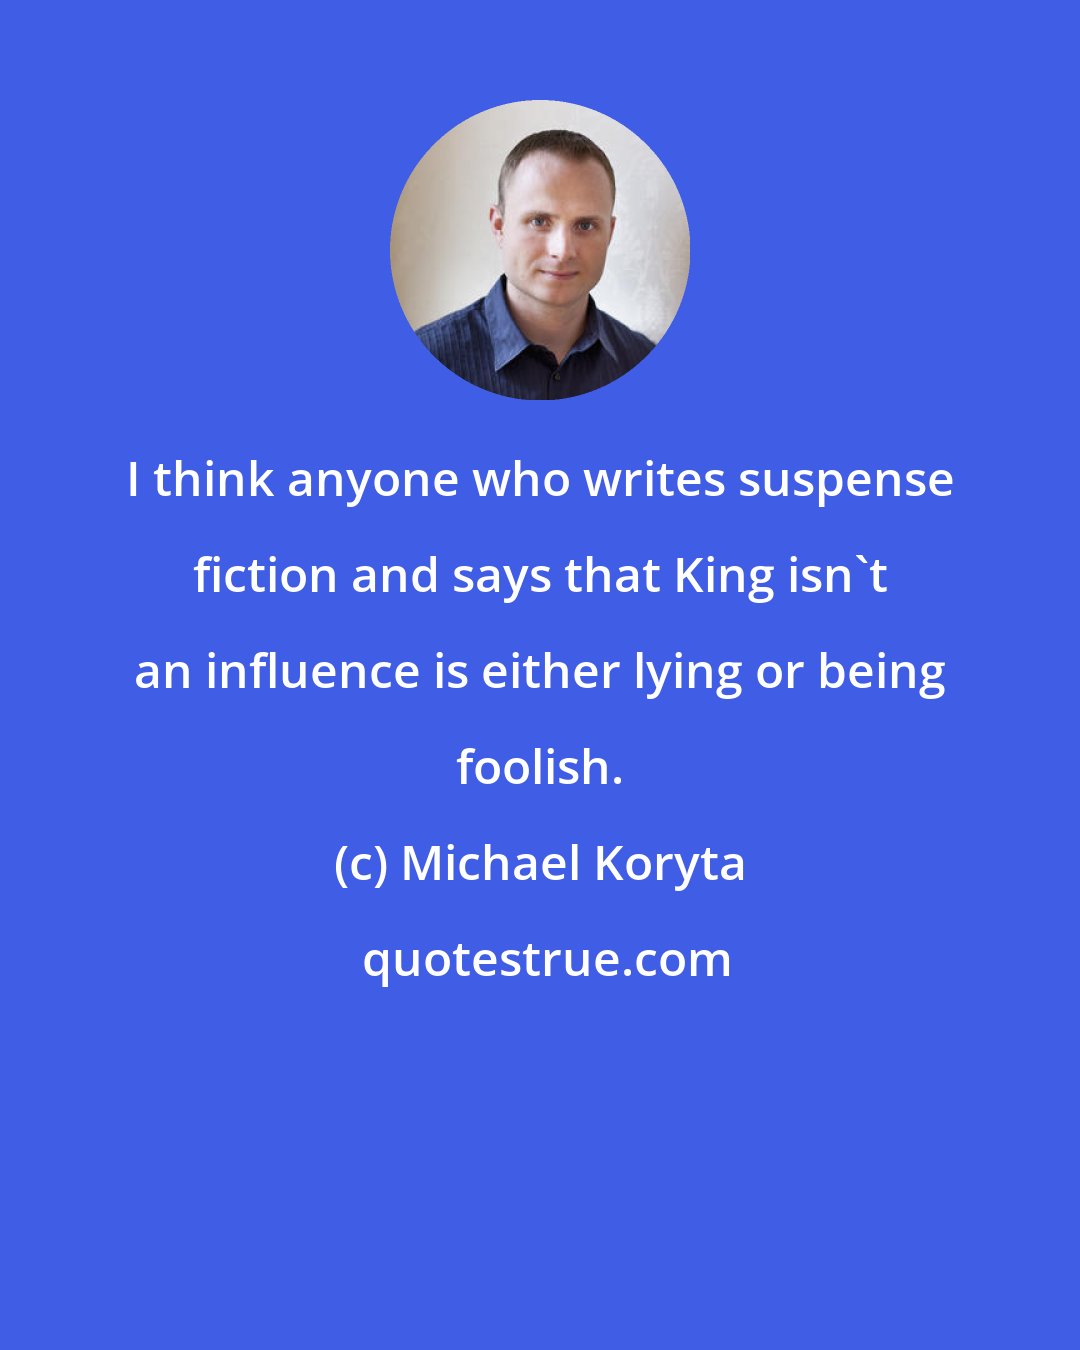 Michael Koryta: I think anyone who writes suspense fiction and says that King isn't an influence is either lying or being foolish.